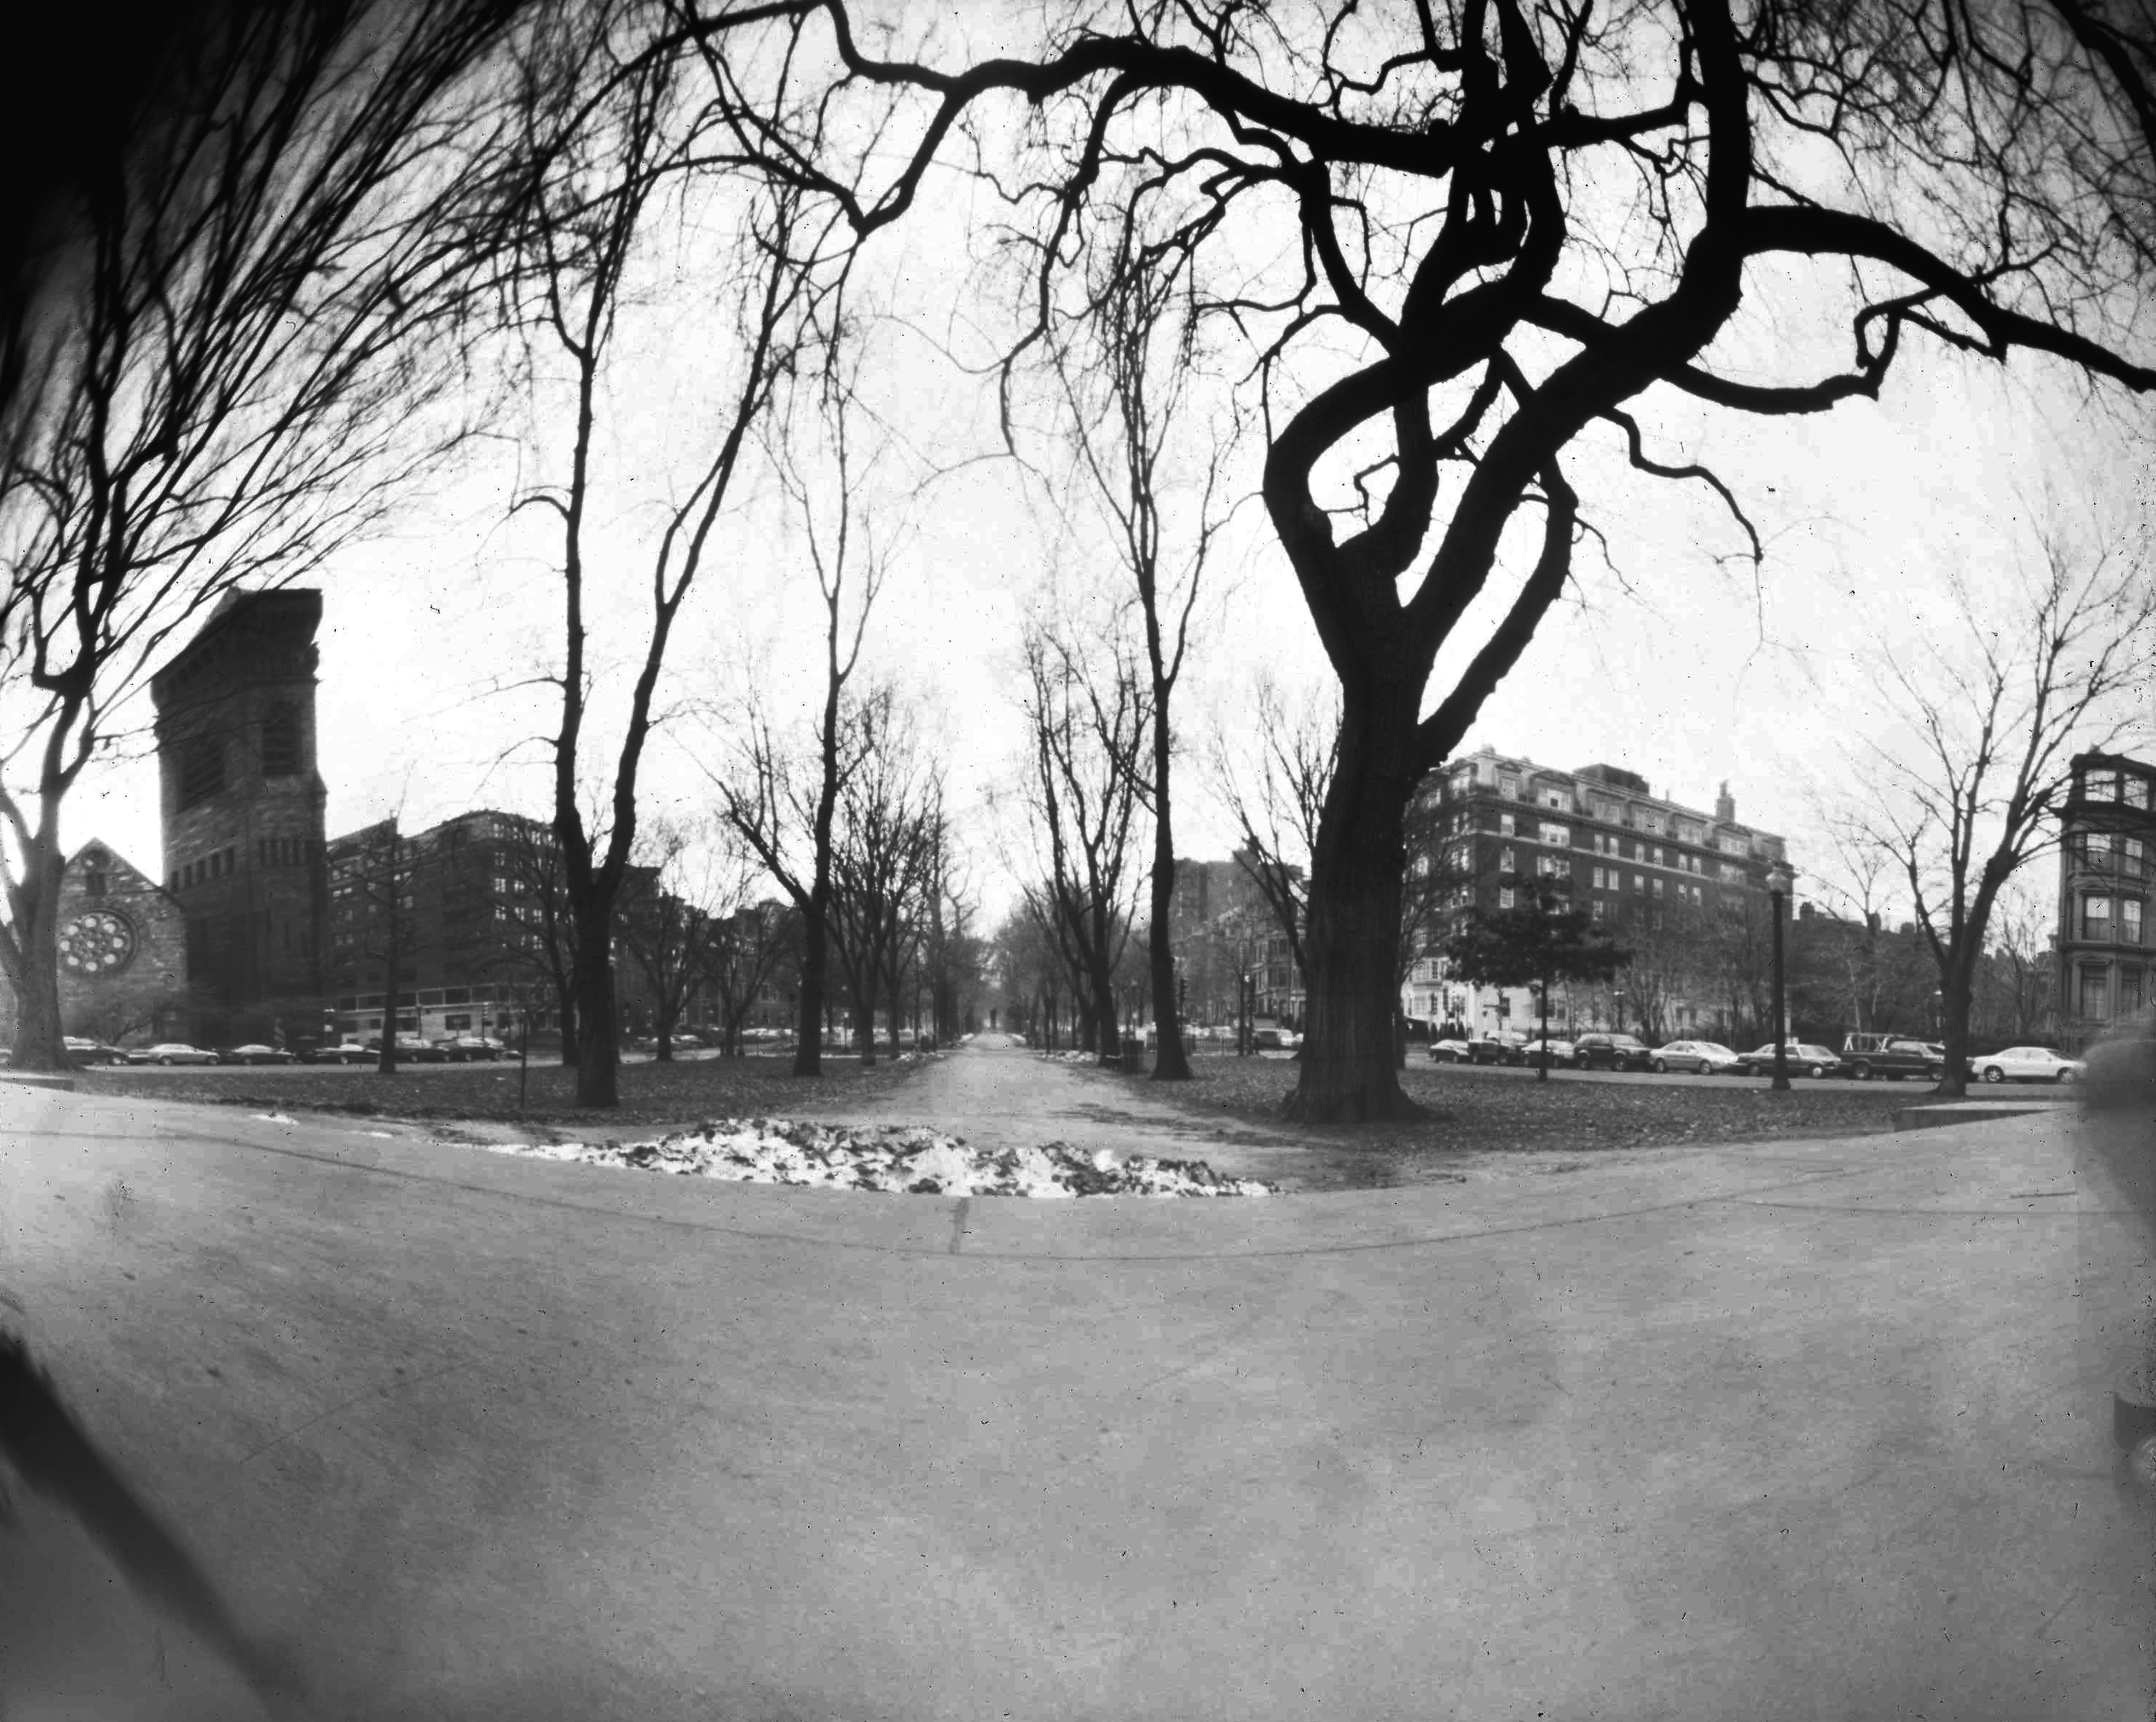 a black and white pinhole camera photograph with a large amount of curvature distortion except at the center of the image; a path leads from the paved surface in the foreground to the center of the image; the path is lined with large trees, bare in winter; there are two streets on either side of the mall, and buildings lining the streets; the building visible furthest an the right side of the image is the first baptist church of boston